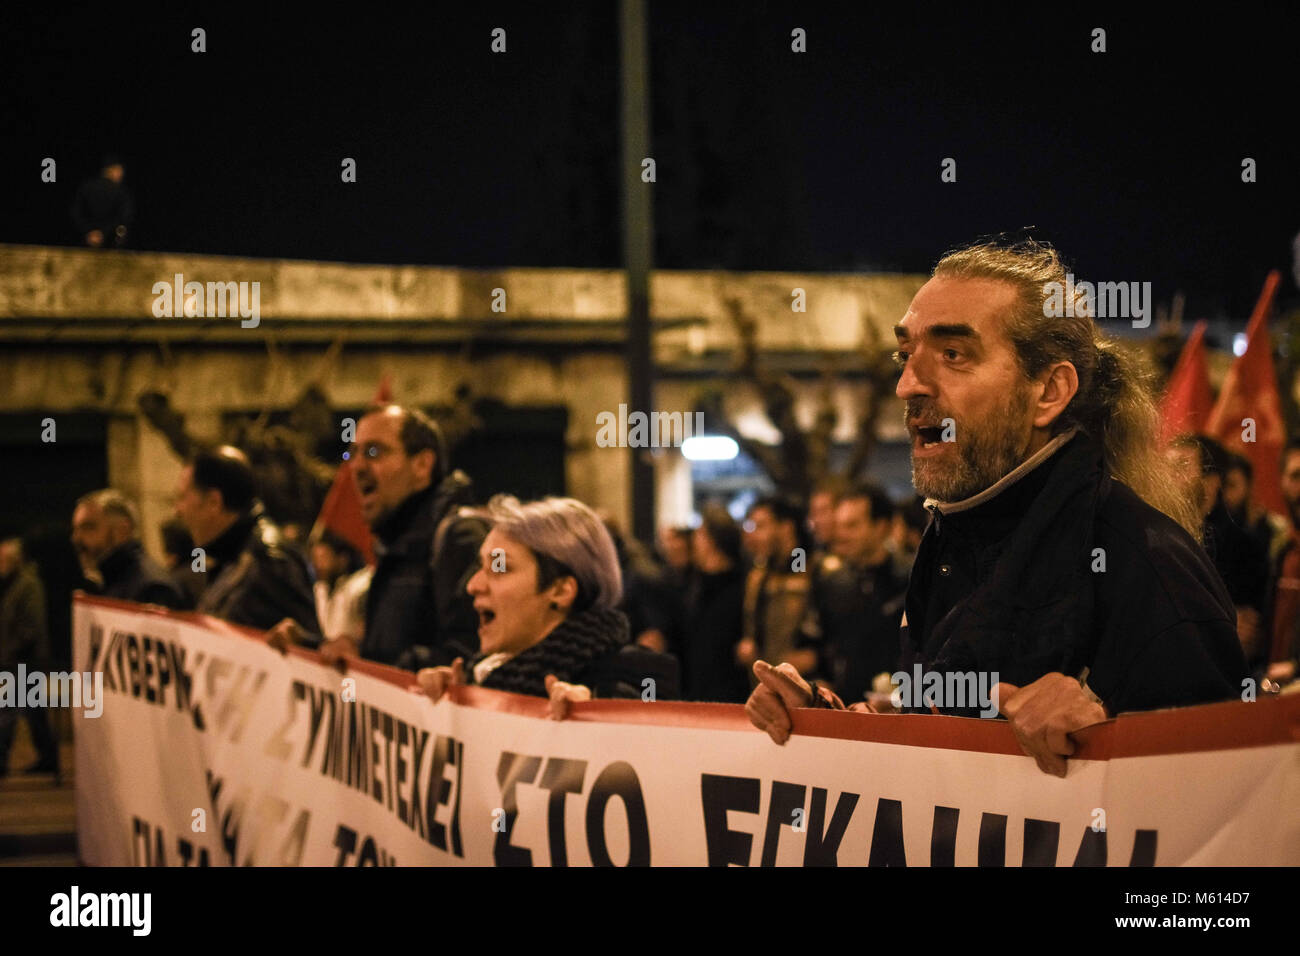 Athens, Greece. 27th Feb, 2018. People holding banner and shouting slogans during the demonstration.Demonstration at Syntagma Square in Athens as general secretary of the Communist Party of Greece delivers a speech on developments in the Balkans, the Middle East and the Greek-Turkish relations. Credit: N Kokovlis 27.2.2018 13 .jpg/SOPA Images/ZUMA Wire/Alamy Live News Stock Photo